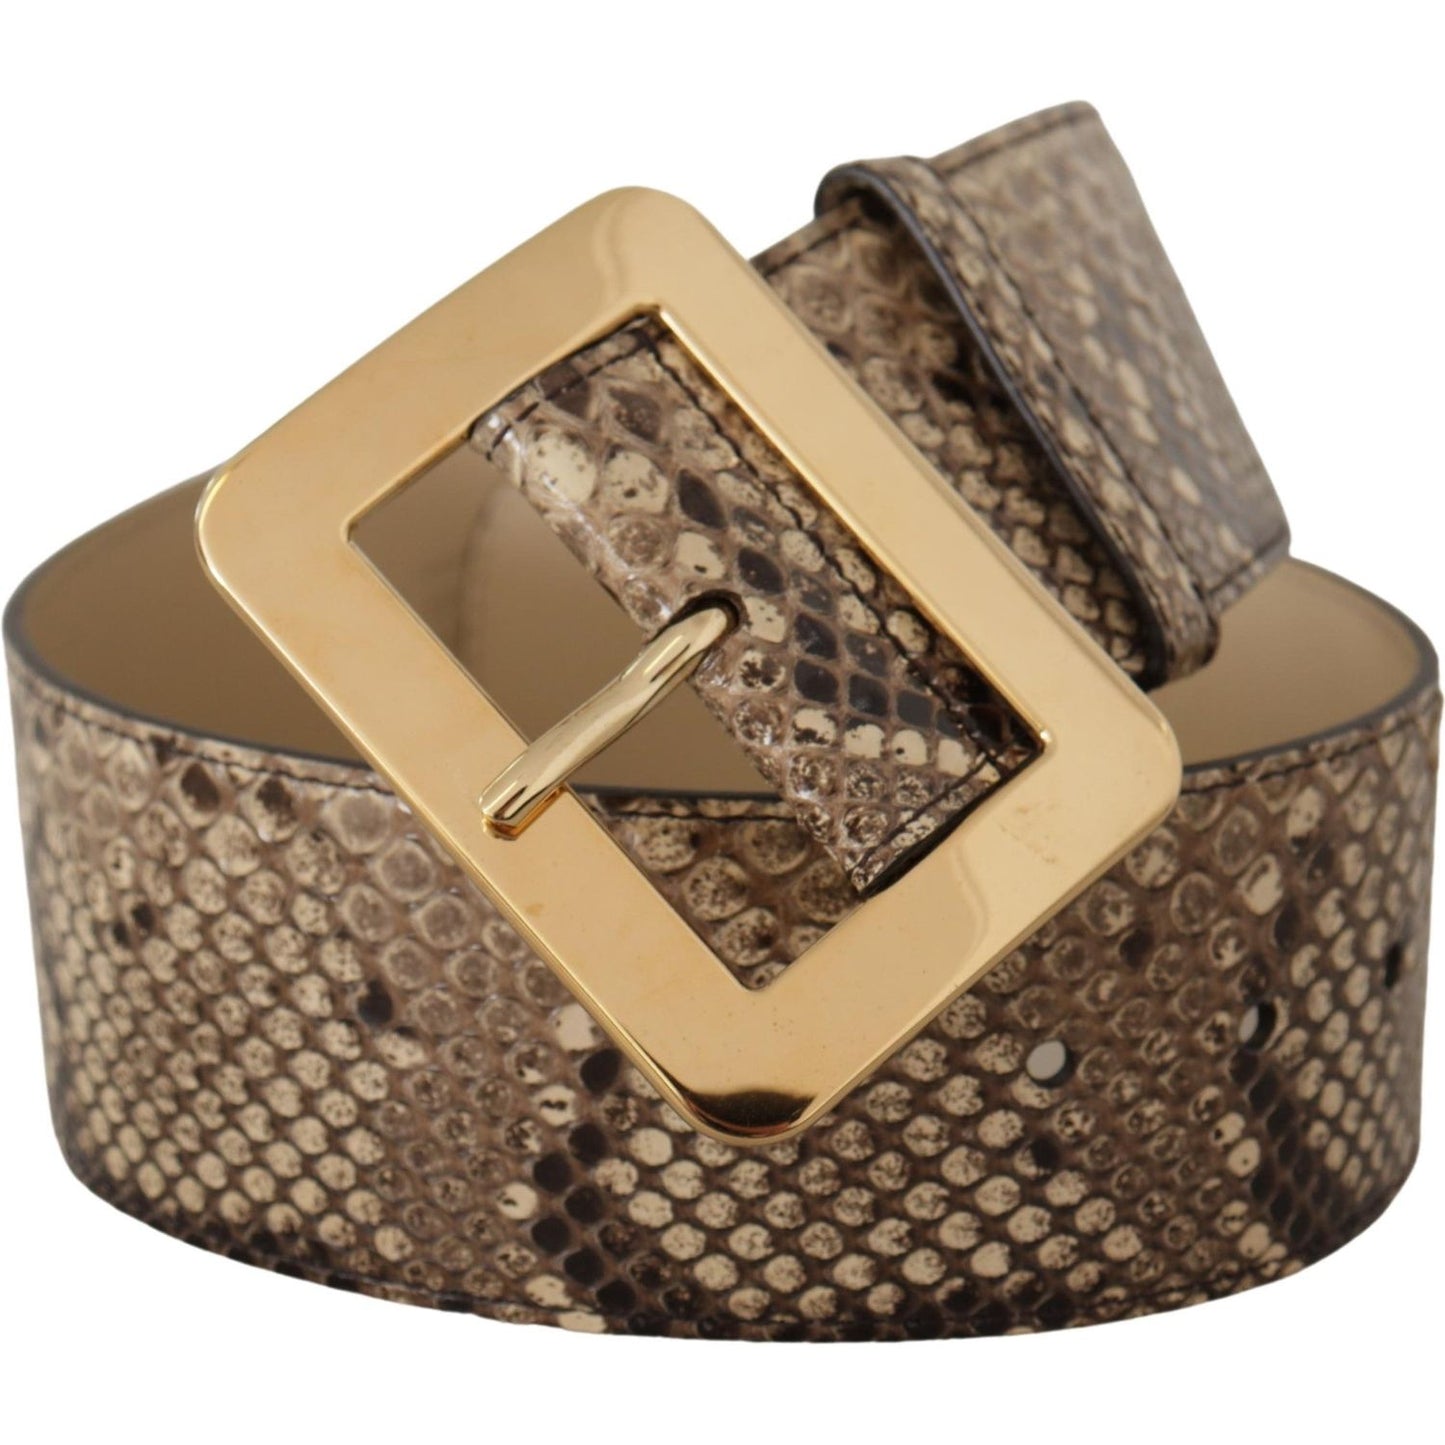 Dolce & Gabbana Elegant Leather Belt with Engraved Buckle brown-exotic-wide-waist-leather-gold-metal-buckle-belt